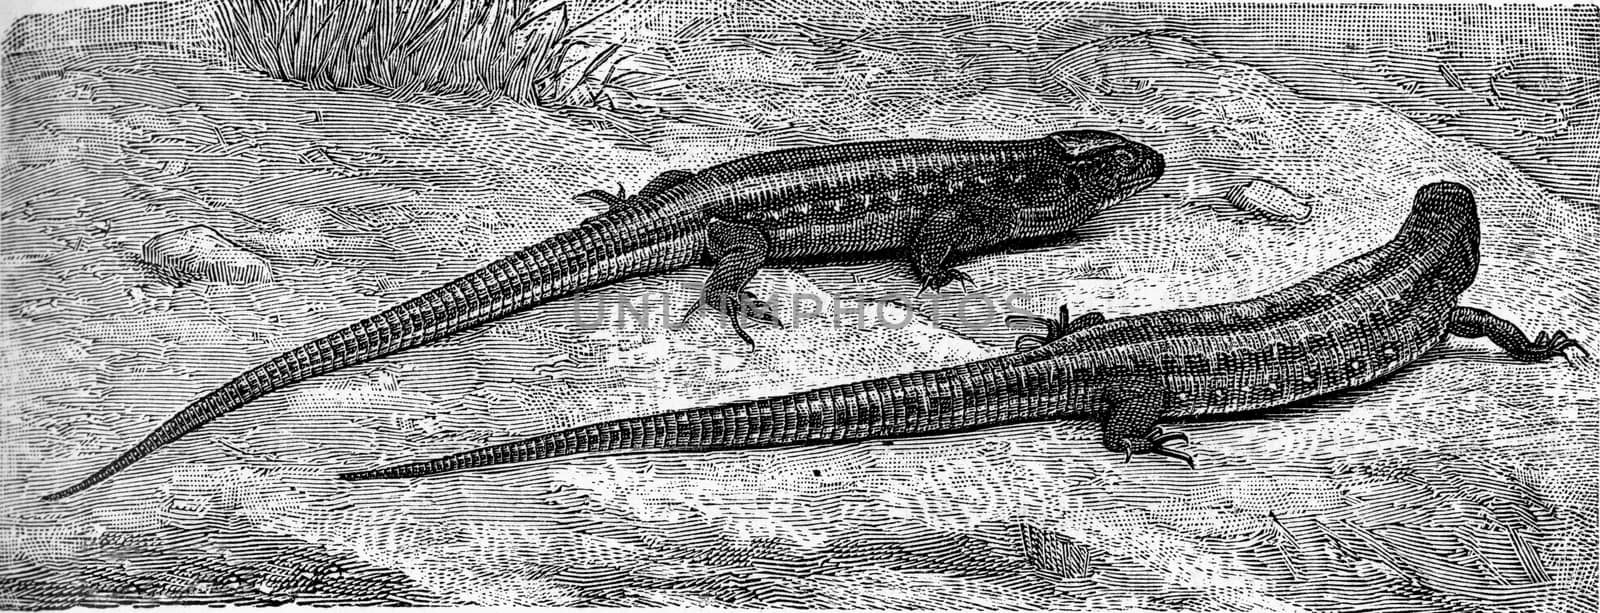 The common lizard, vintage engraved illustration. From Deutch Vogel Teaching in Zoology.
